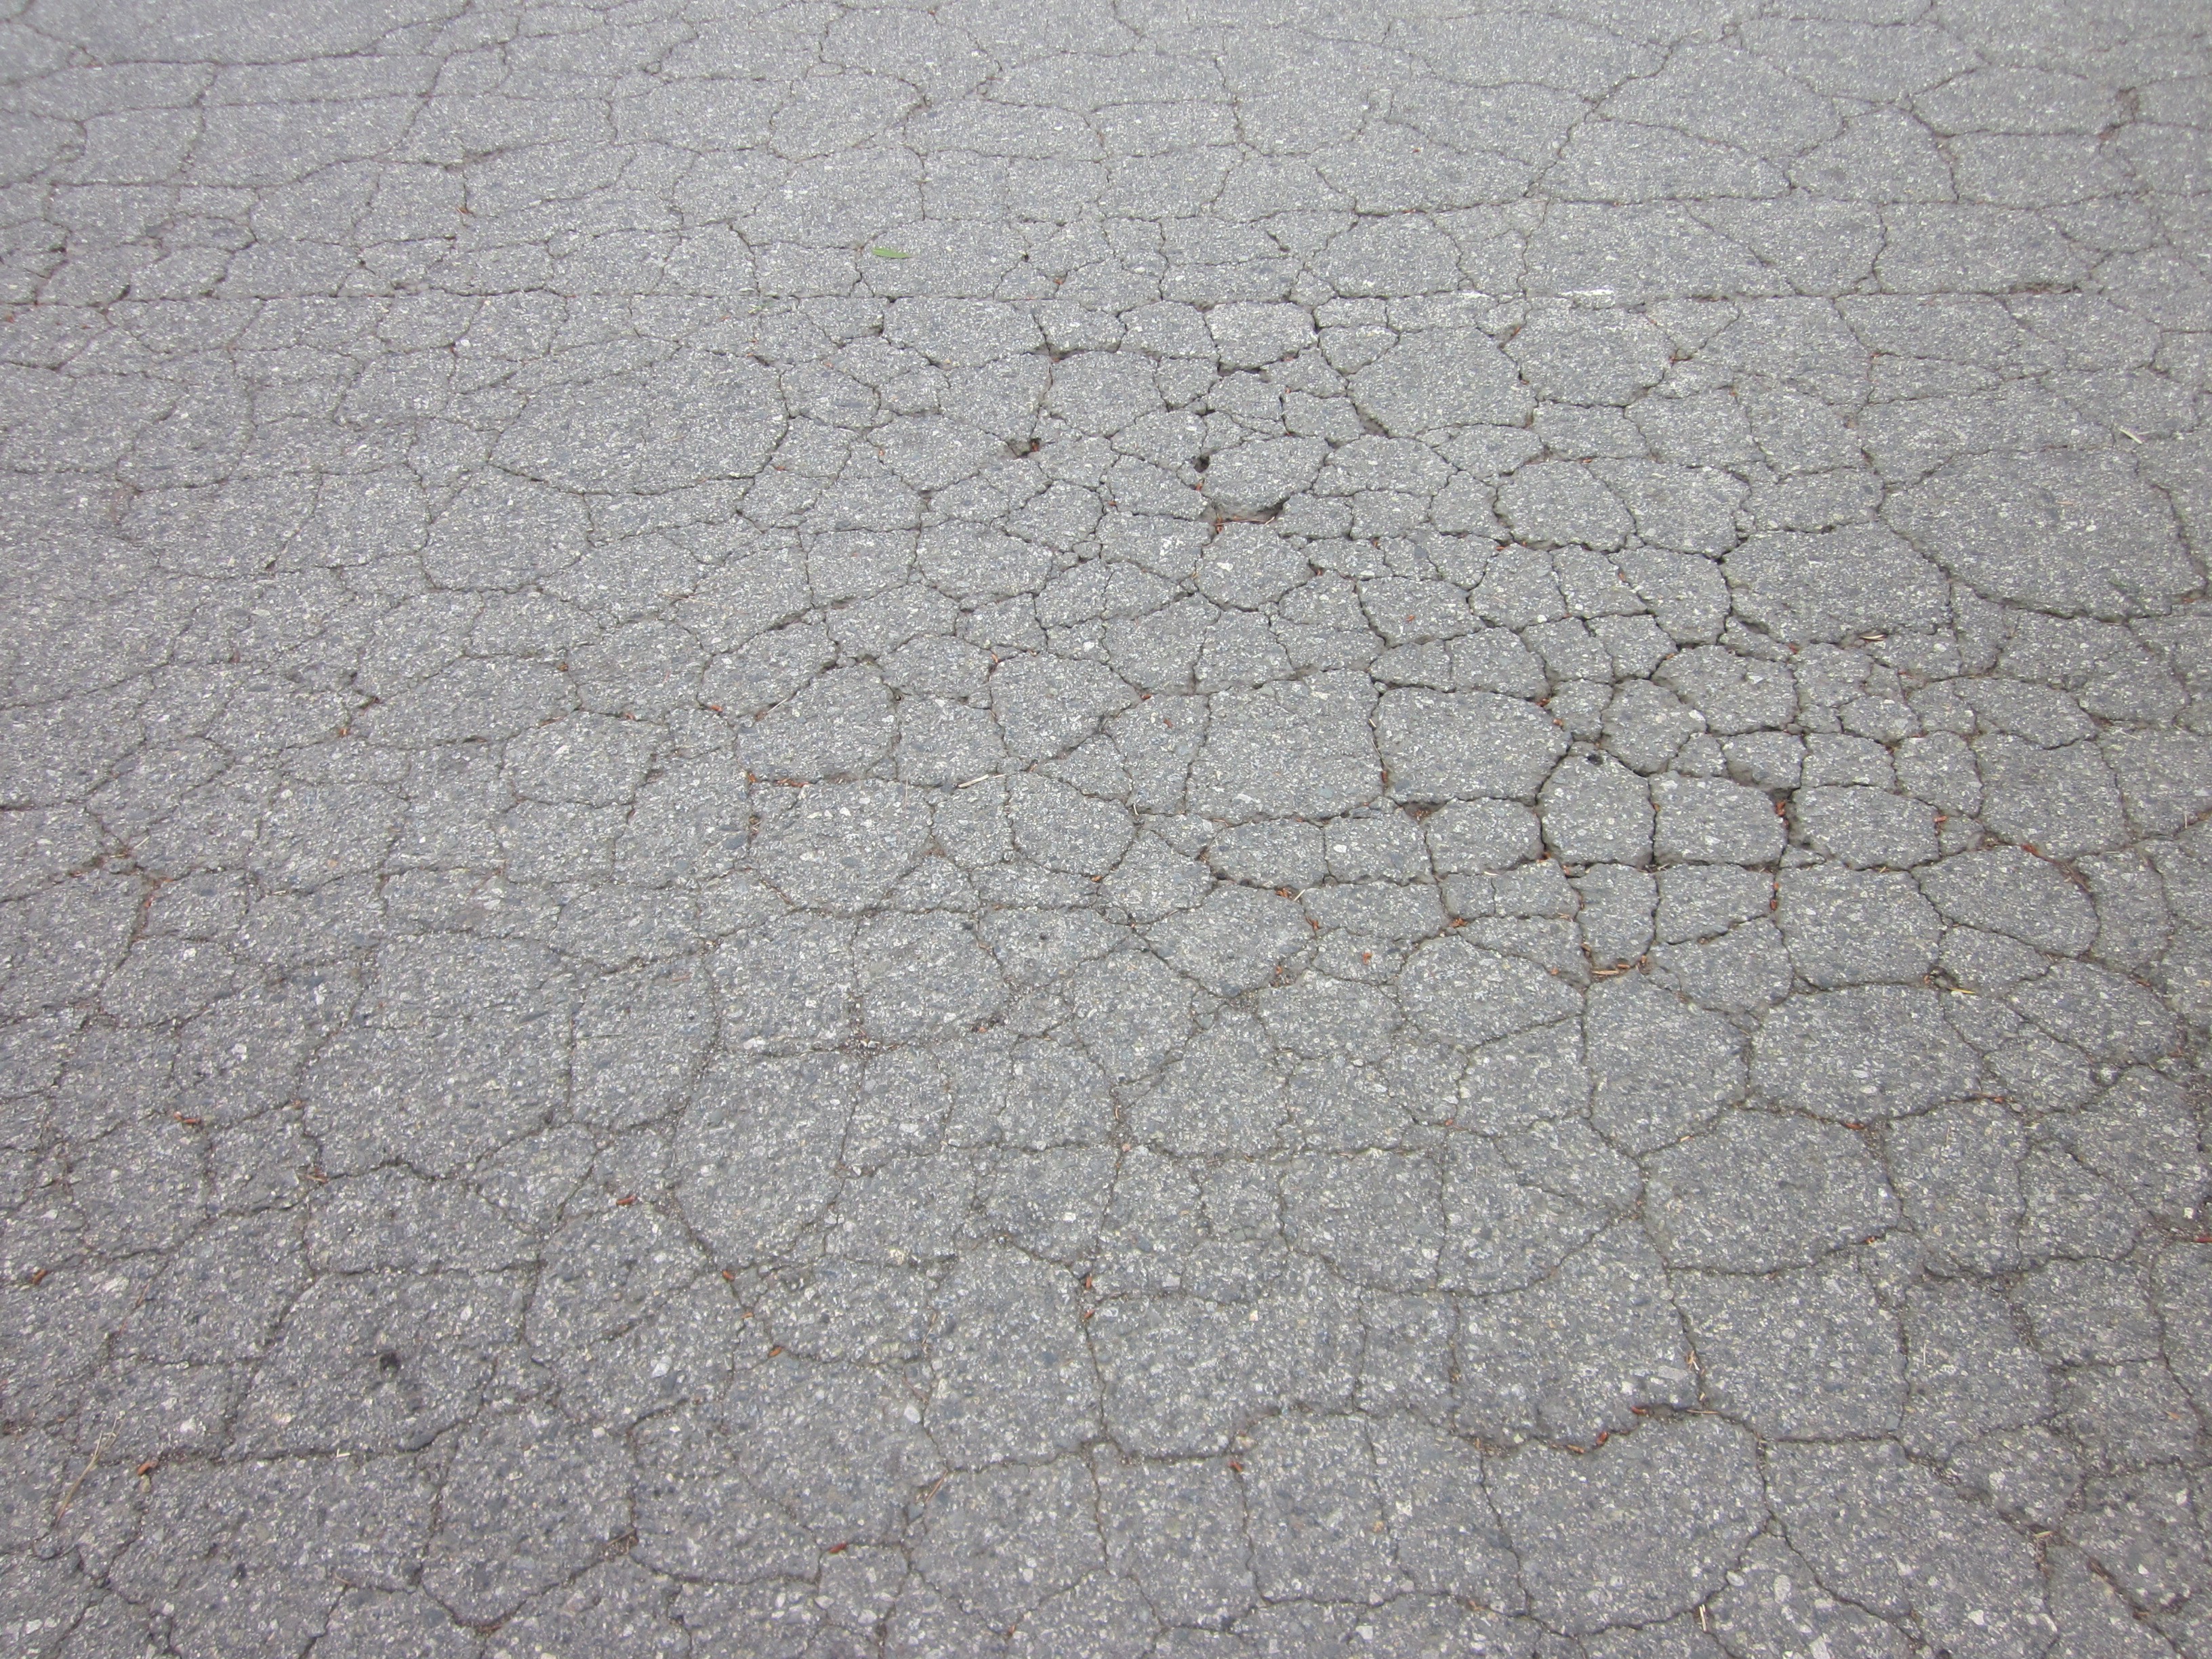 What Effect Does Cold Weather Have on Pavement? - Driveway Paving NJ ...